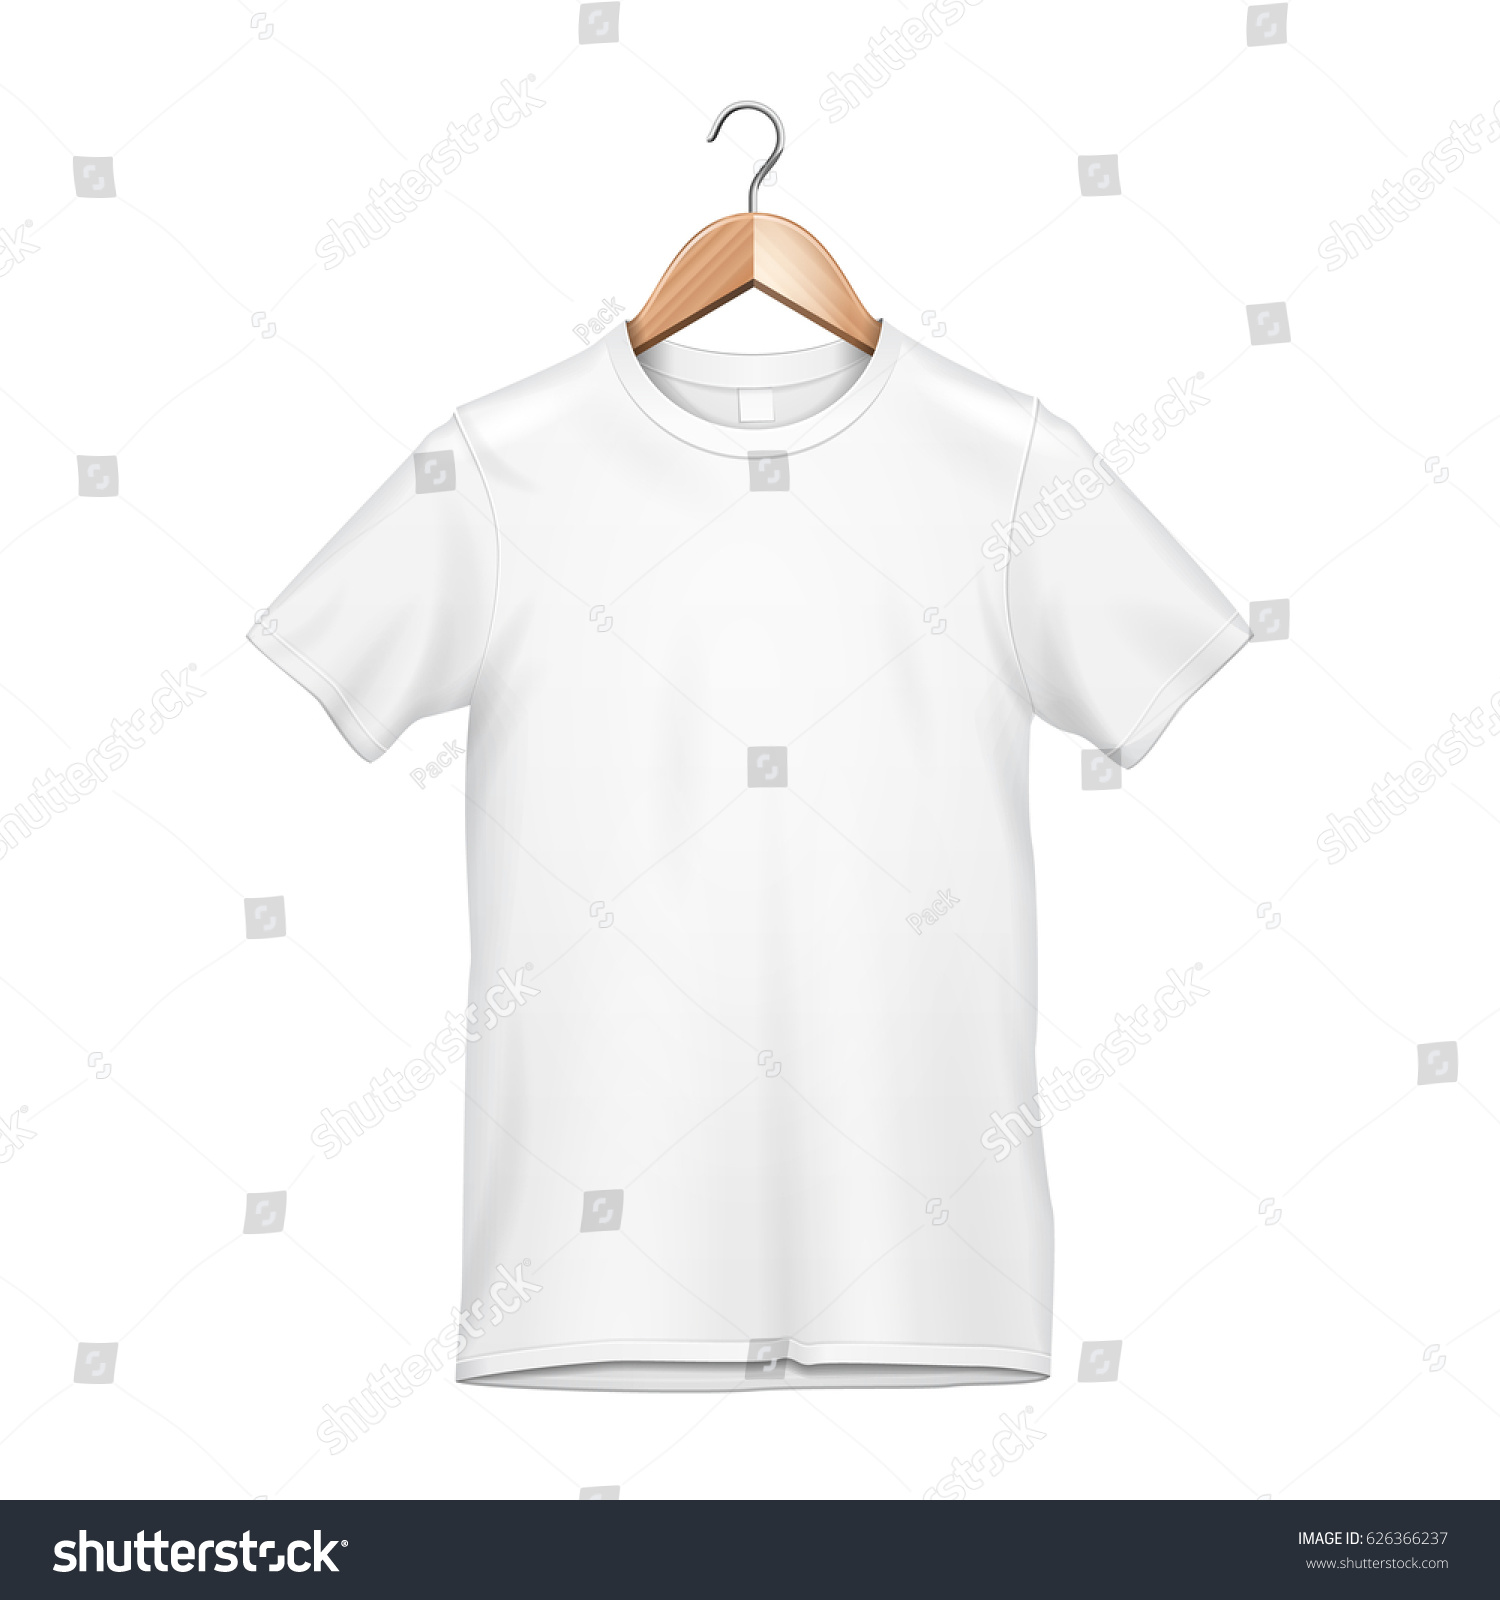 Download Blank Mens Unisex Cotton Tshirt On Stock Vector 626366237 ...